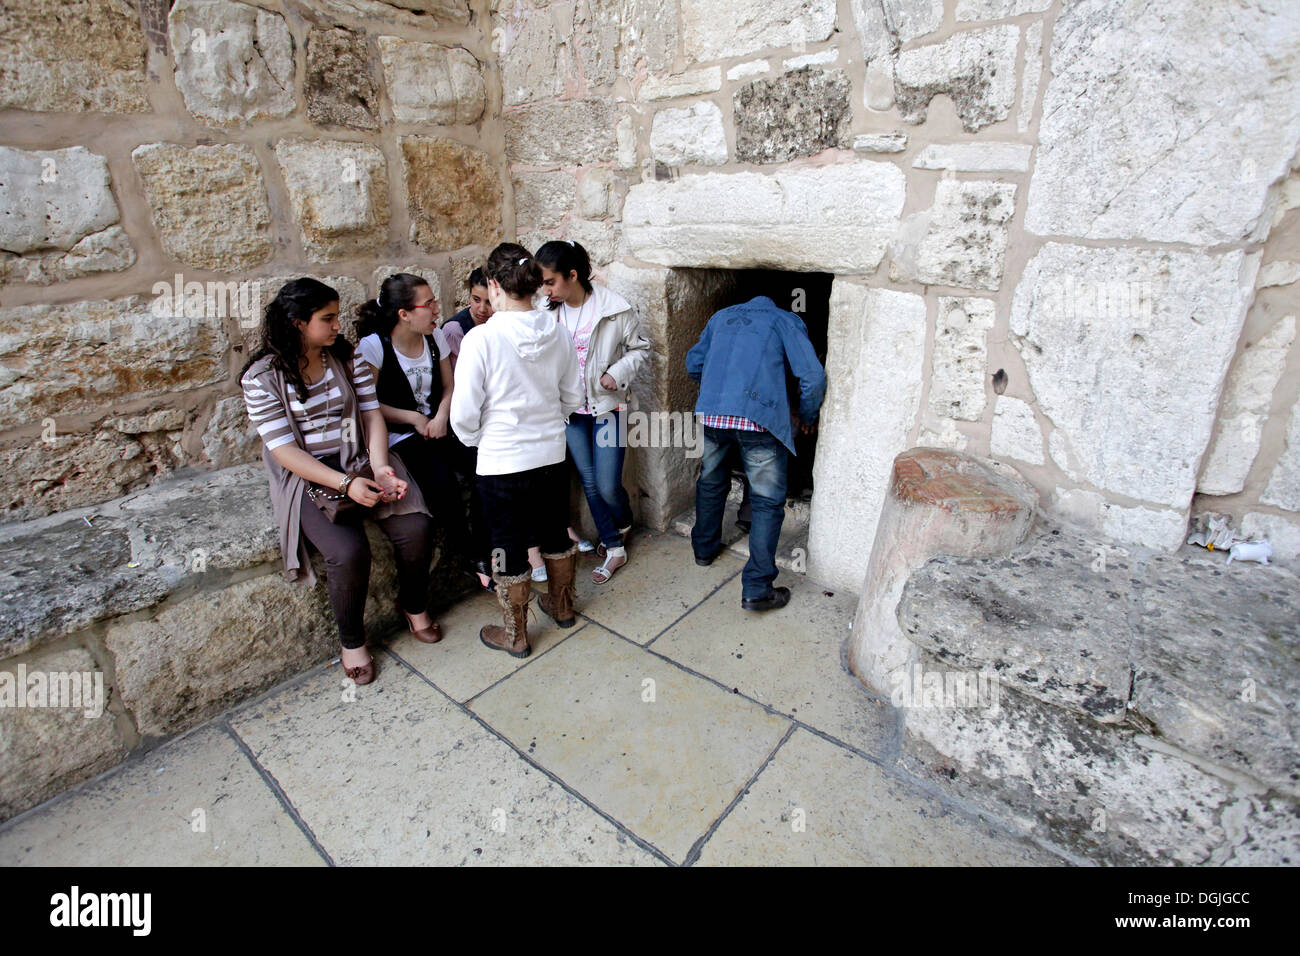 Entrance of the Church of the Nativity, Bethlehem, West Bank, Israel, Middle East Stock Photo